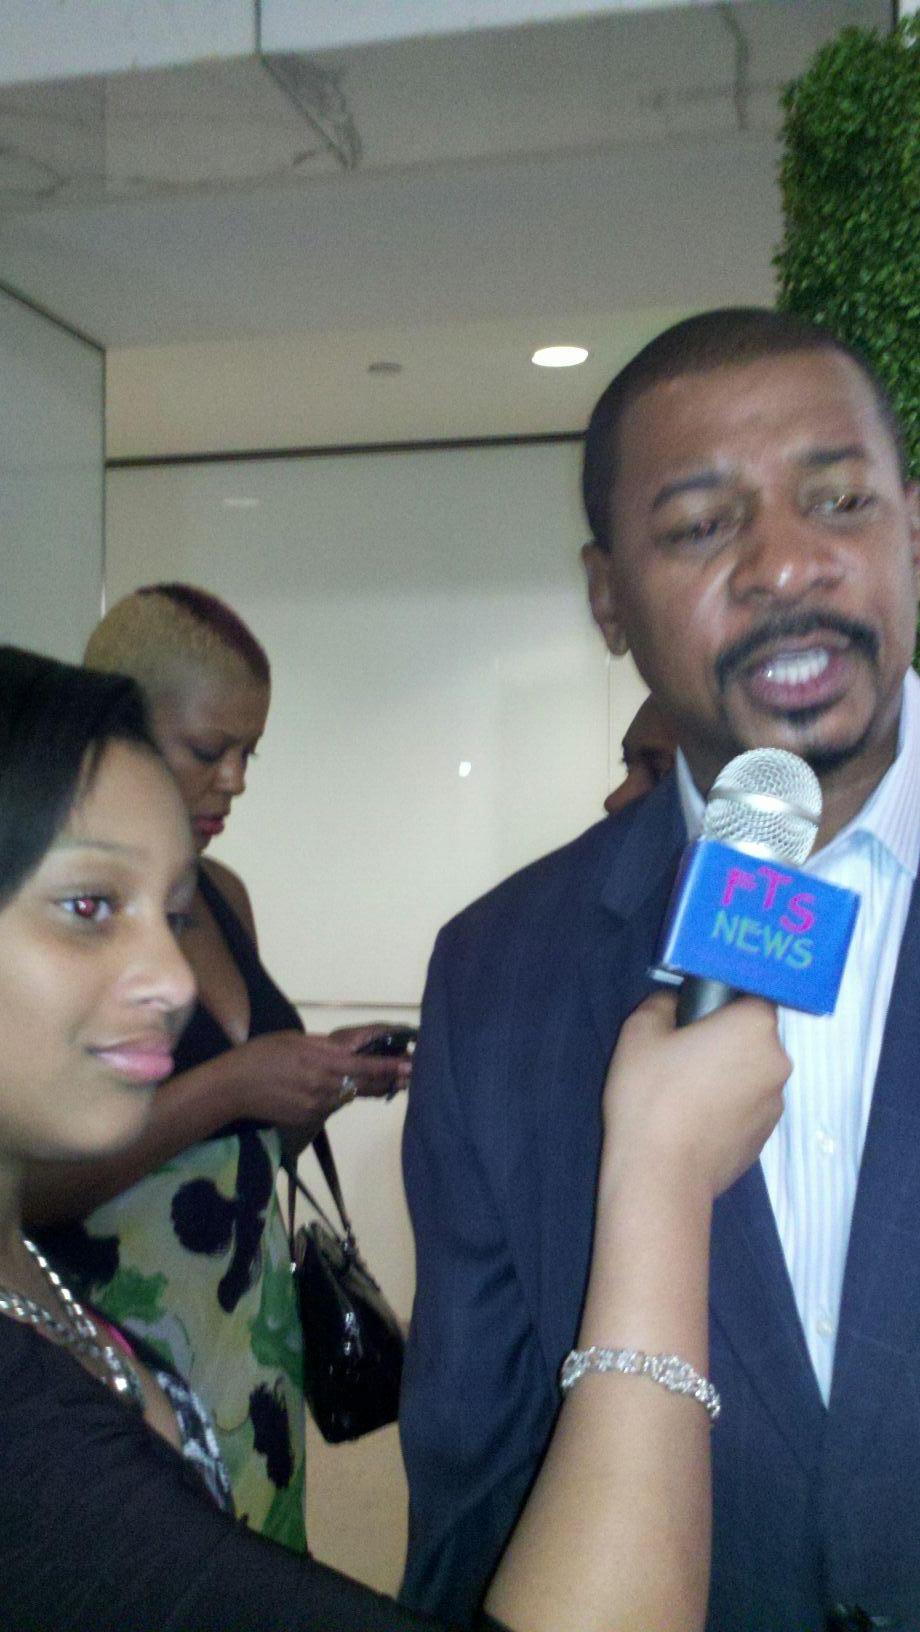 Aliyah at event with Robert Townsend